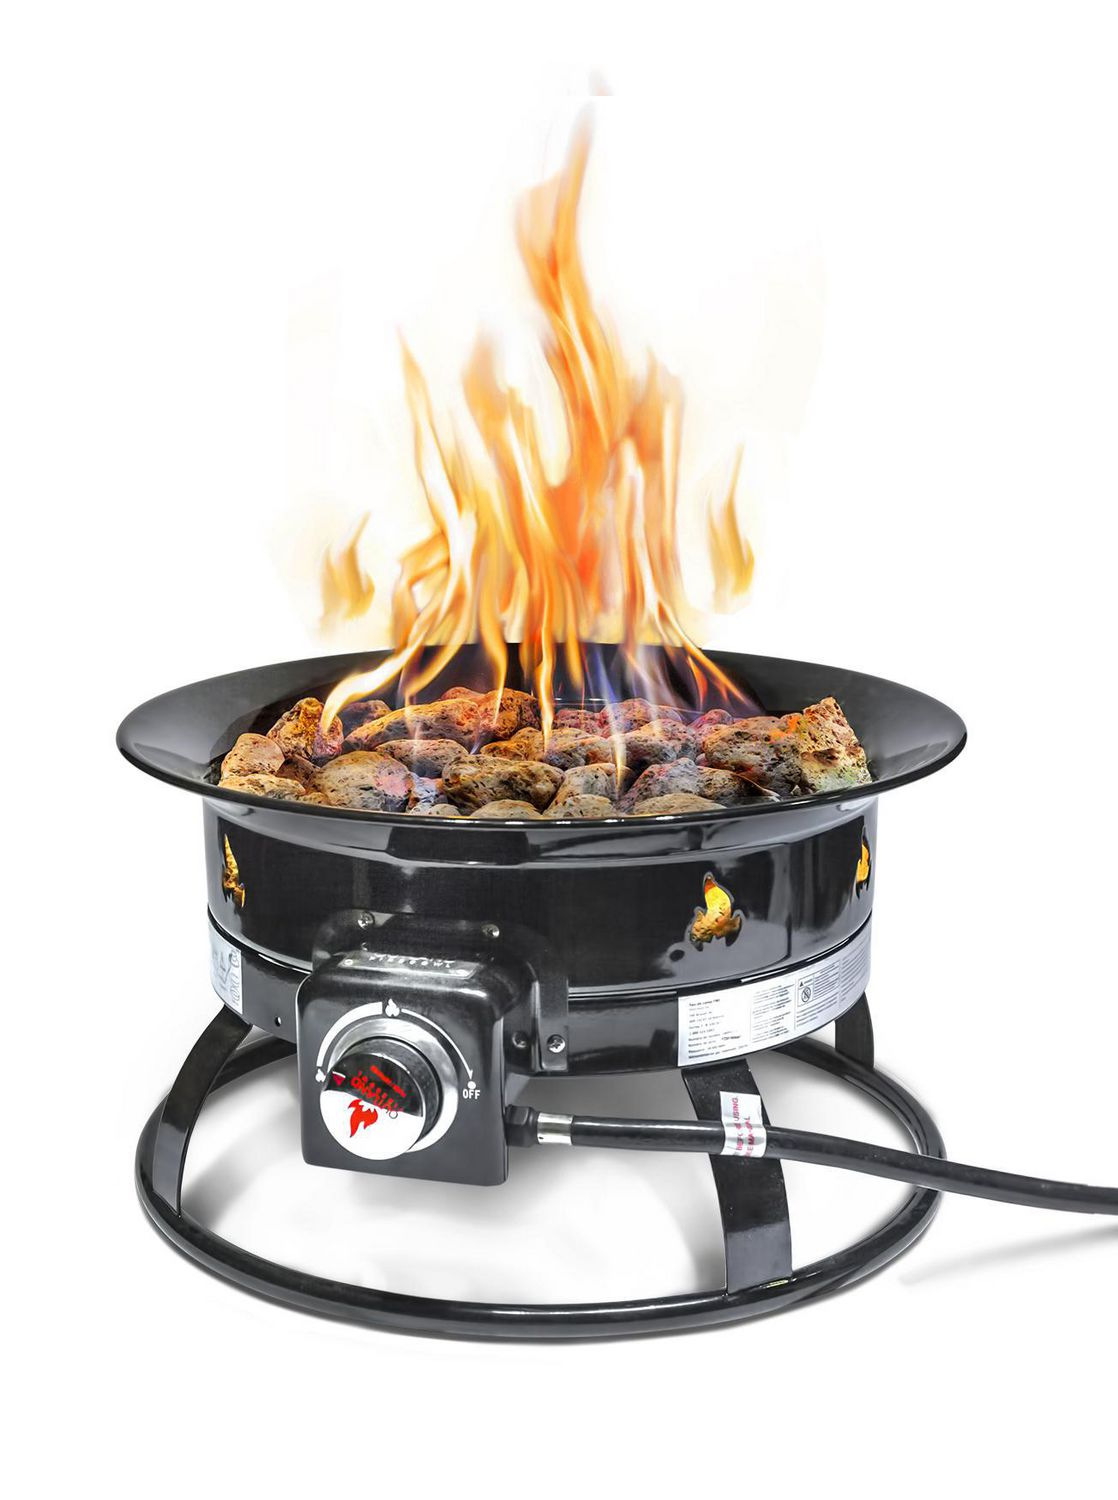 Outland Firebowl Portable Propane Fire, Cooking Over Propane Fire Pit